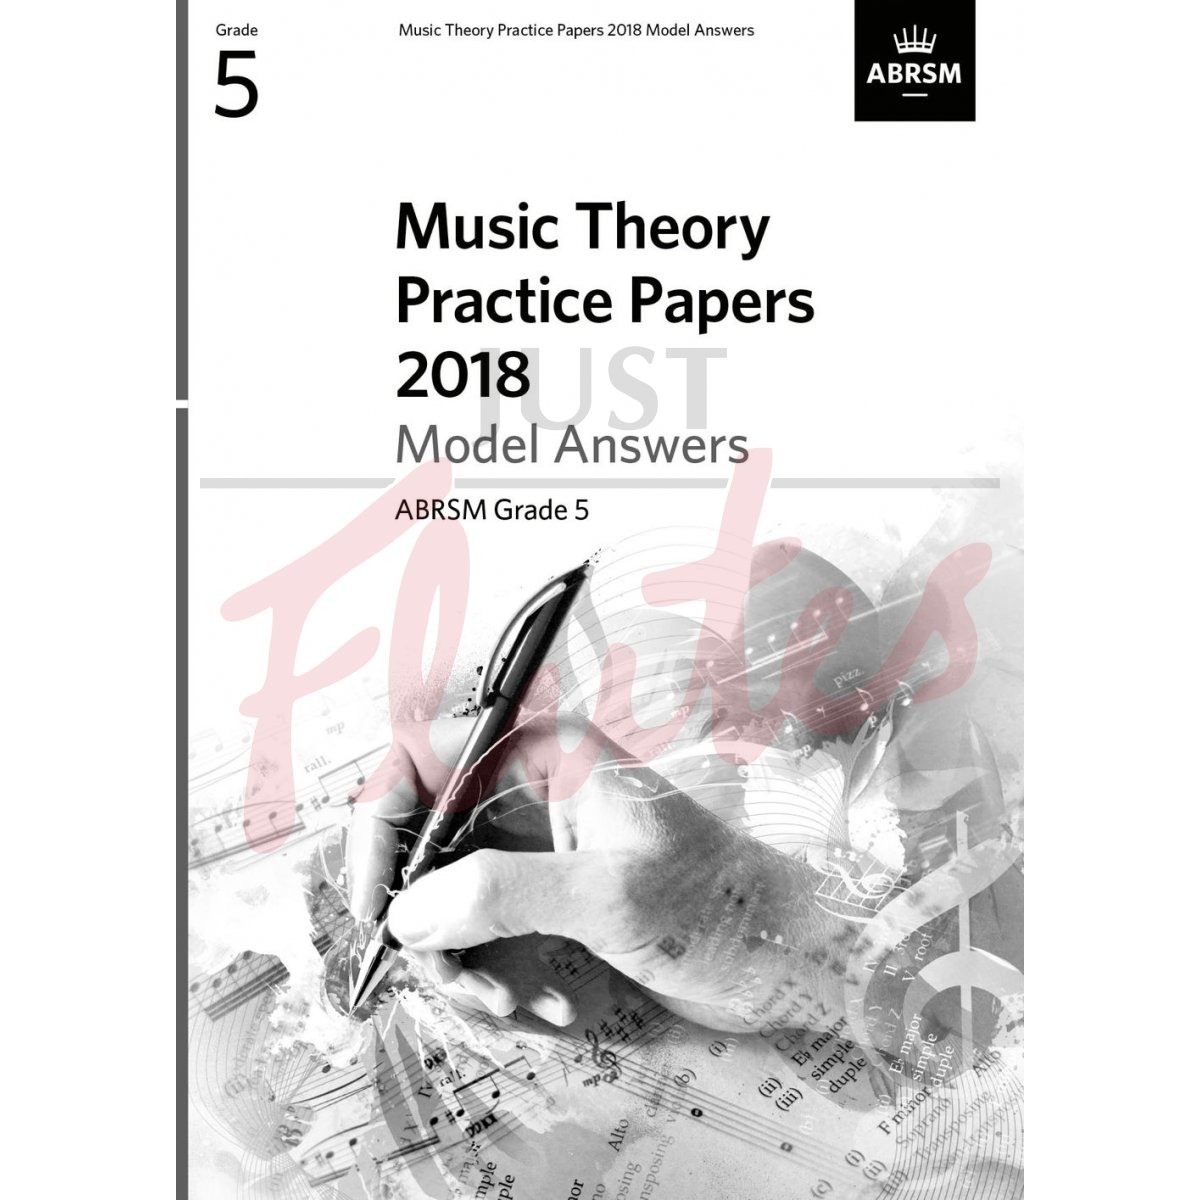 Music Theory Practice Papers 2018 Grade 5 - Model Answers